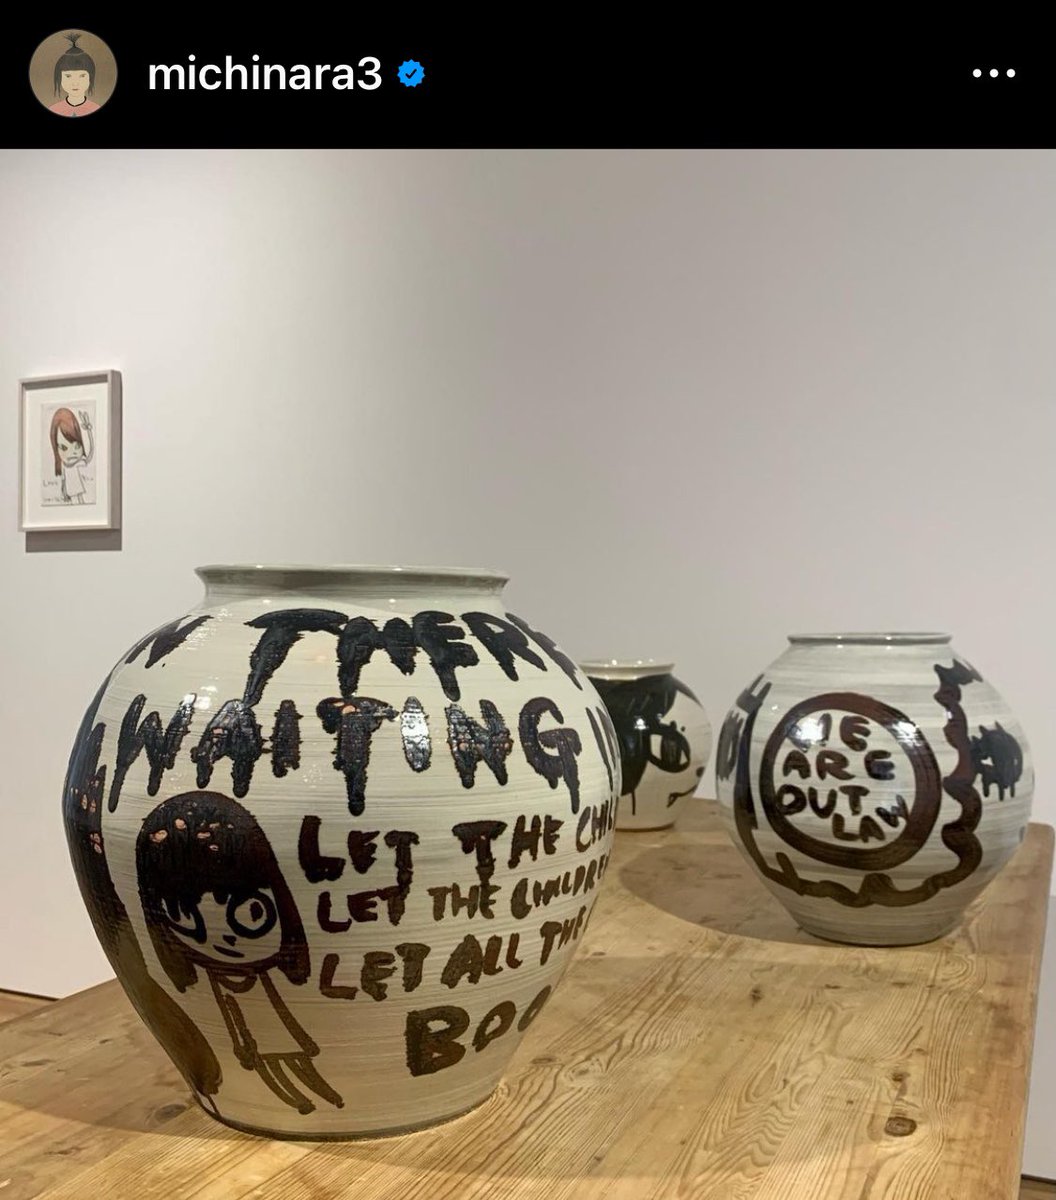 Bingo. Closer look of the new ceramic work by @michinara3 at ‘Casa Namjoon’ Writing on the side[s] of the ceramic: “We are Outlaw” #BTS #RM #BTSonInstagram